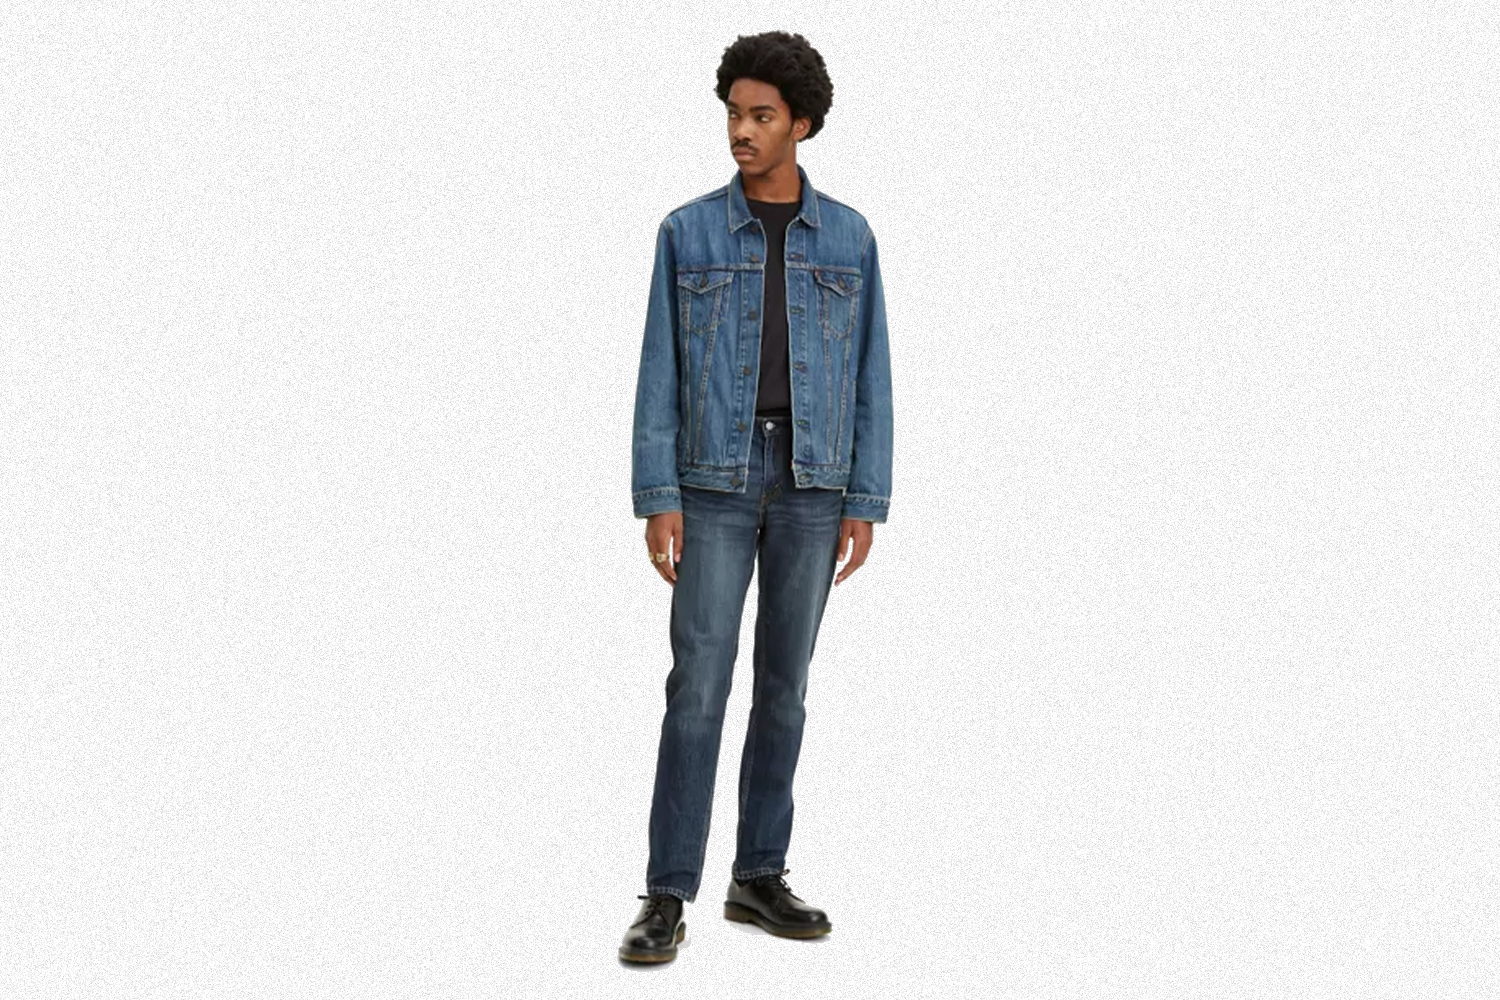 Save Up to 75% at Levi's Warehouse Sale - InsideHook